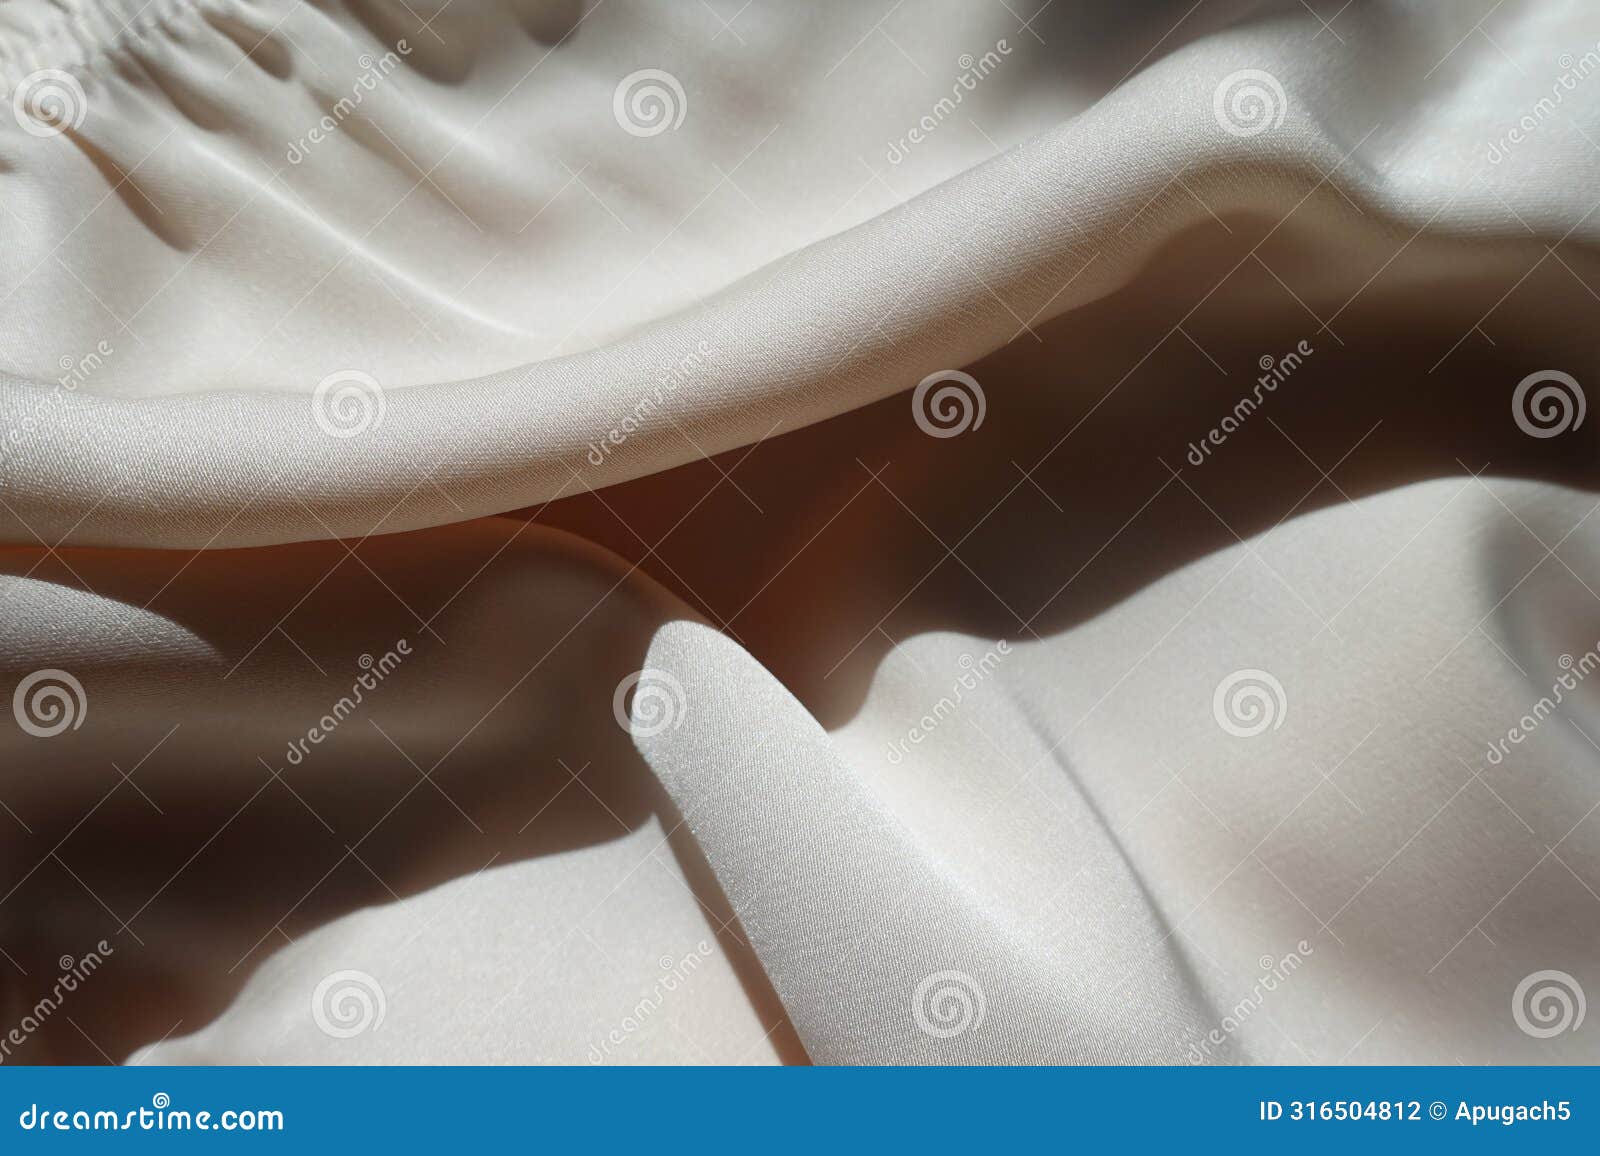 light beige rayon fabric in soft folds